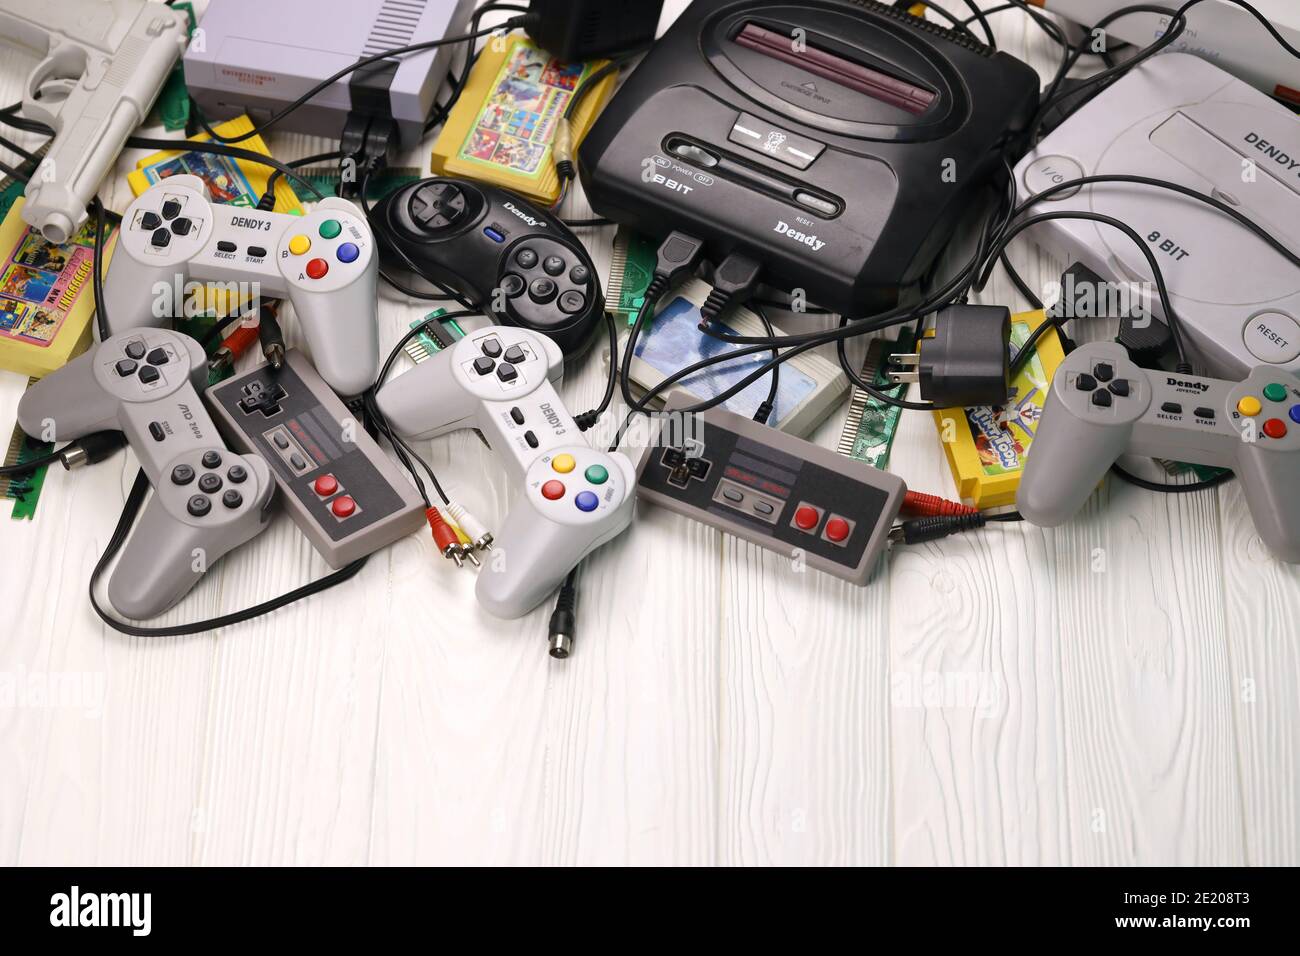 KHARKOV, UKRAINE - DECEMBER 27, 2020: Pile of old 8-bit video game consoles and many gaming accessories like a joysticks and cartridges. Old school re Stock Photo